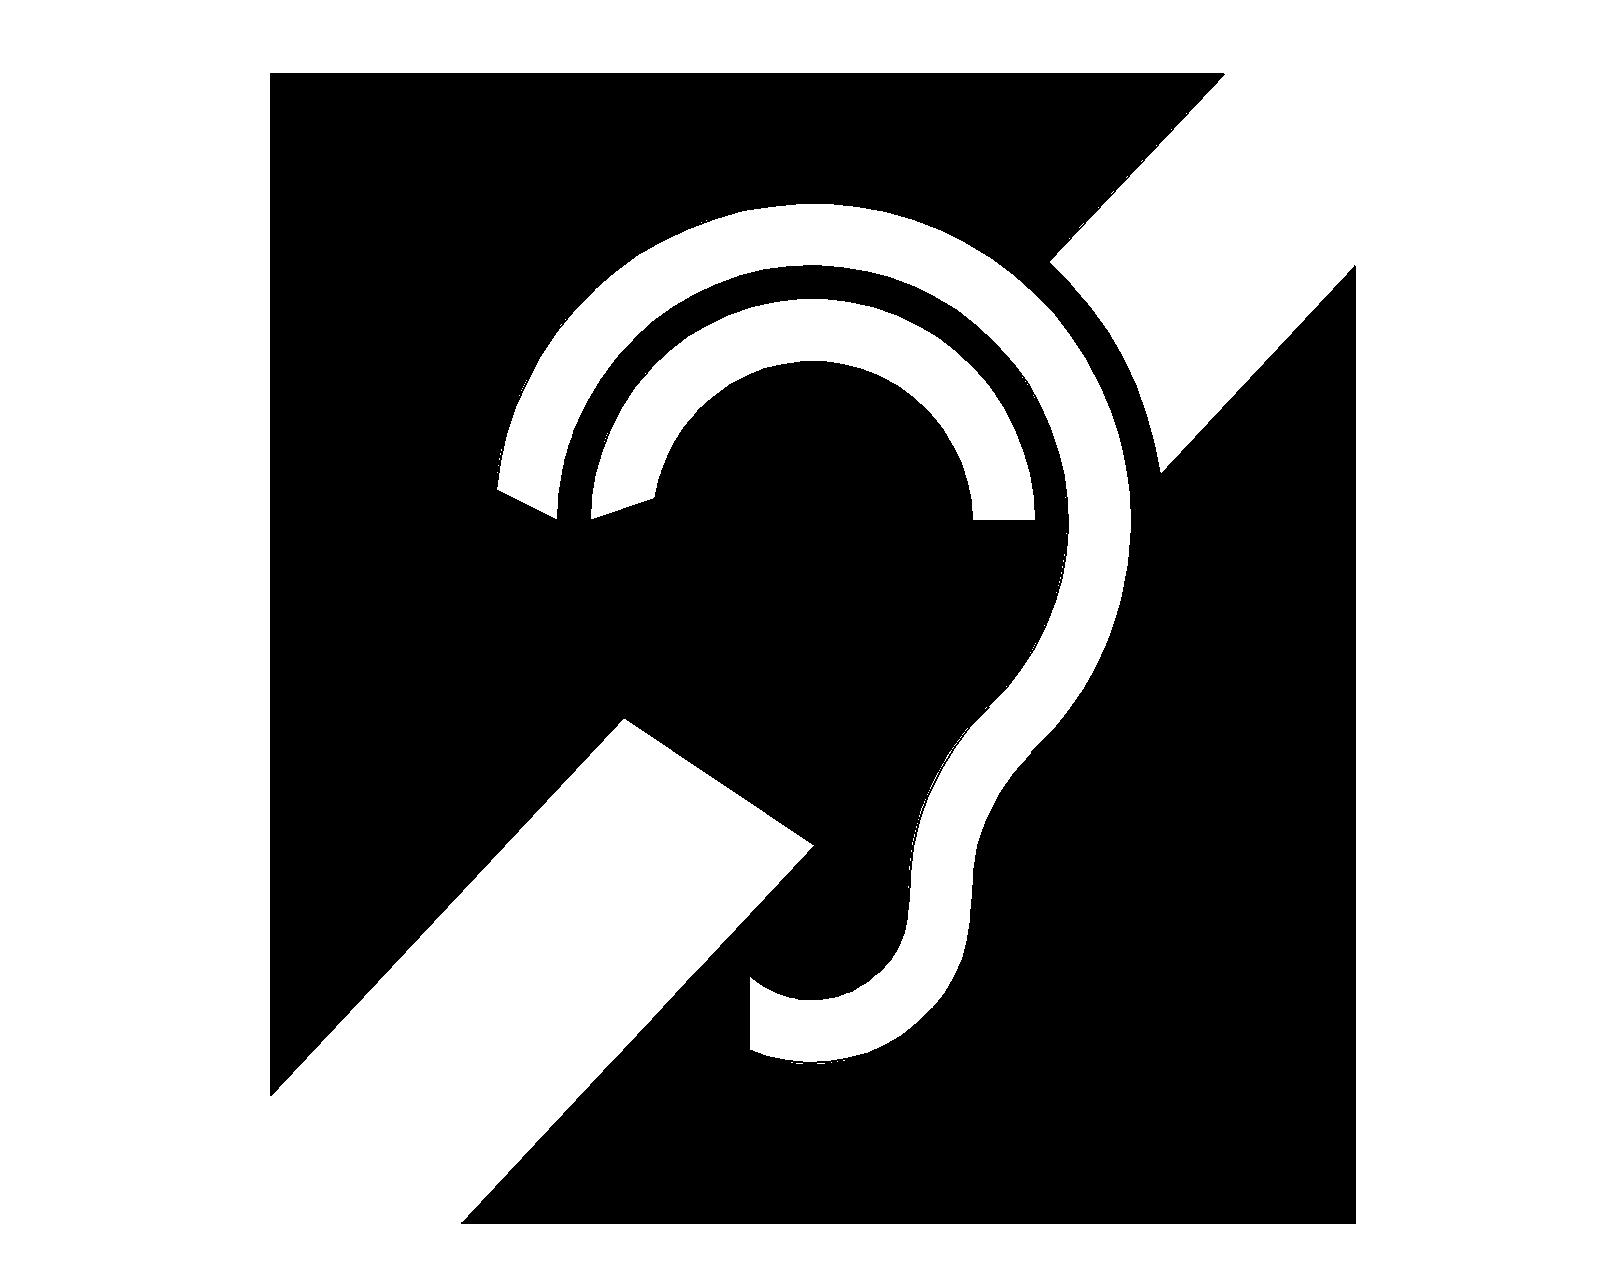 Pictogram with the shape of an ear and a bar diagonally across the shape.